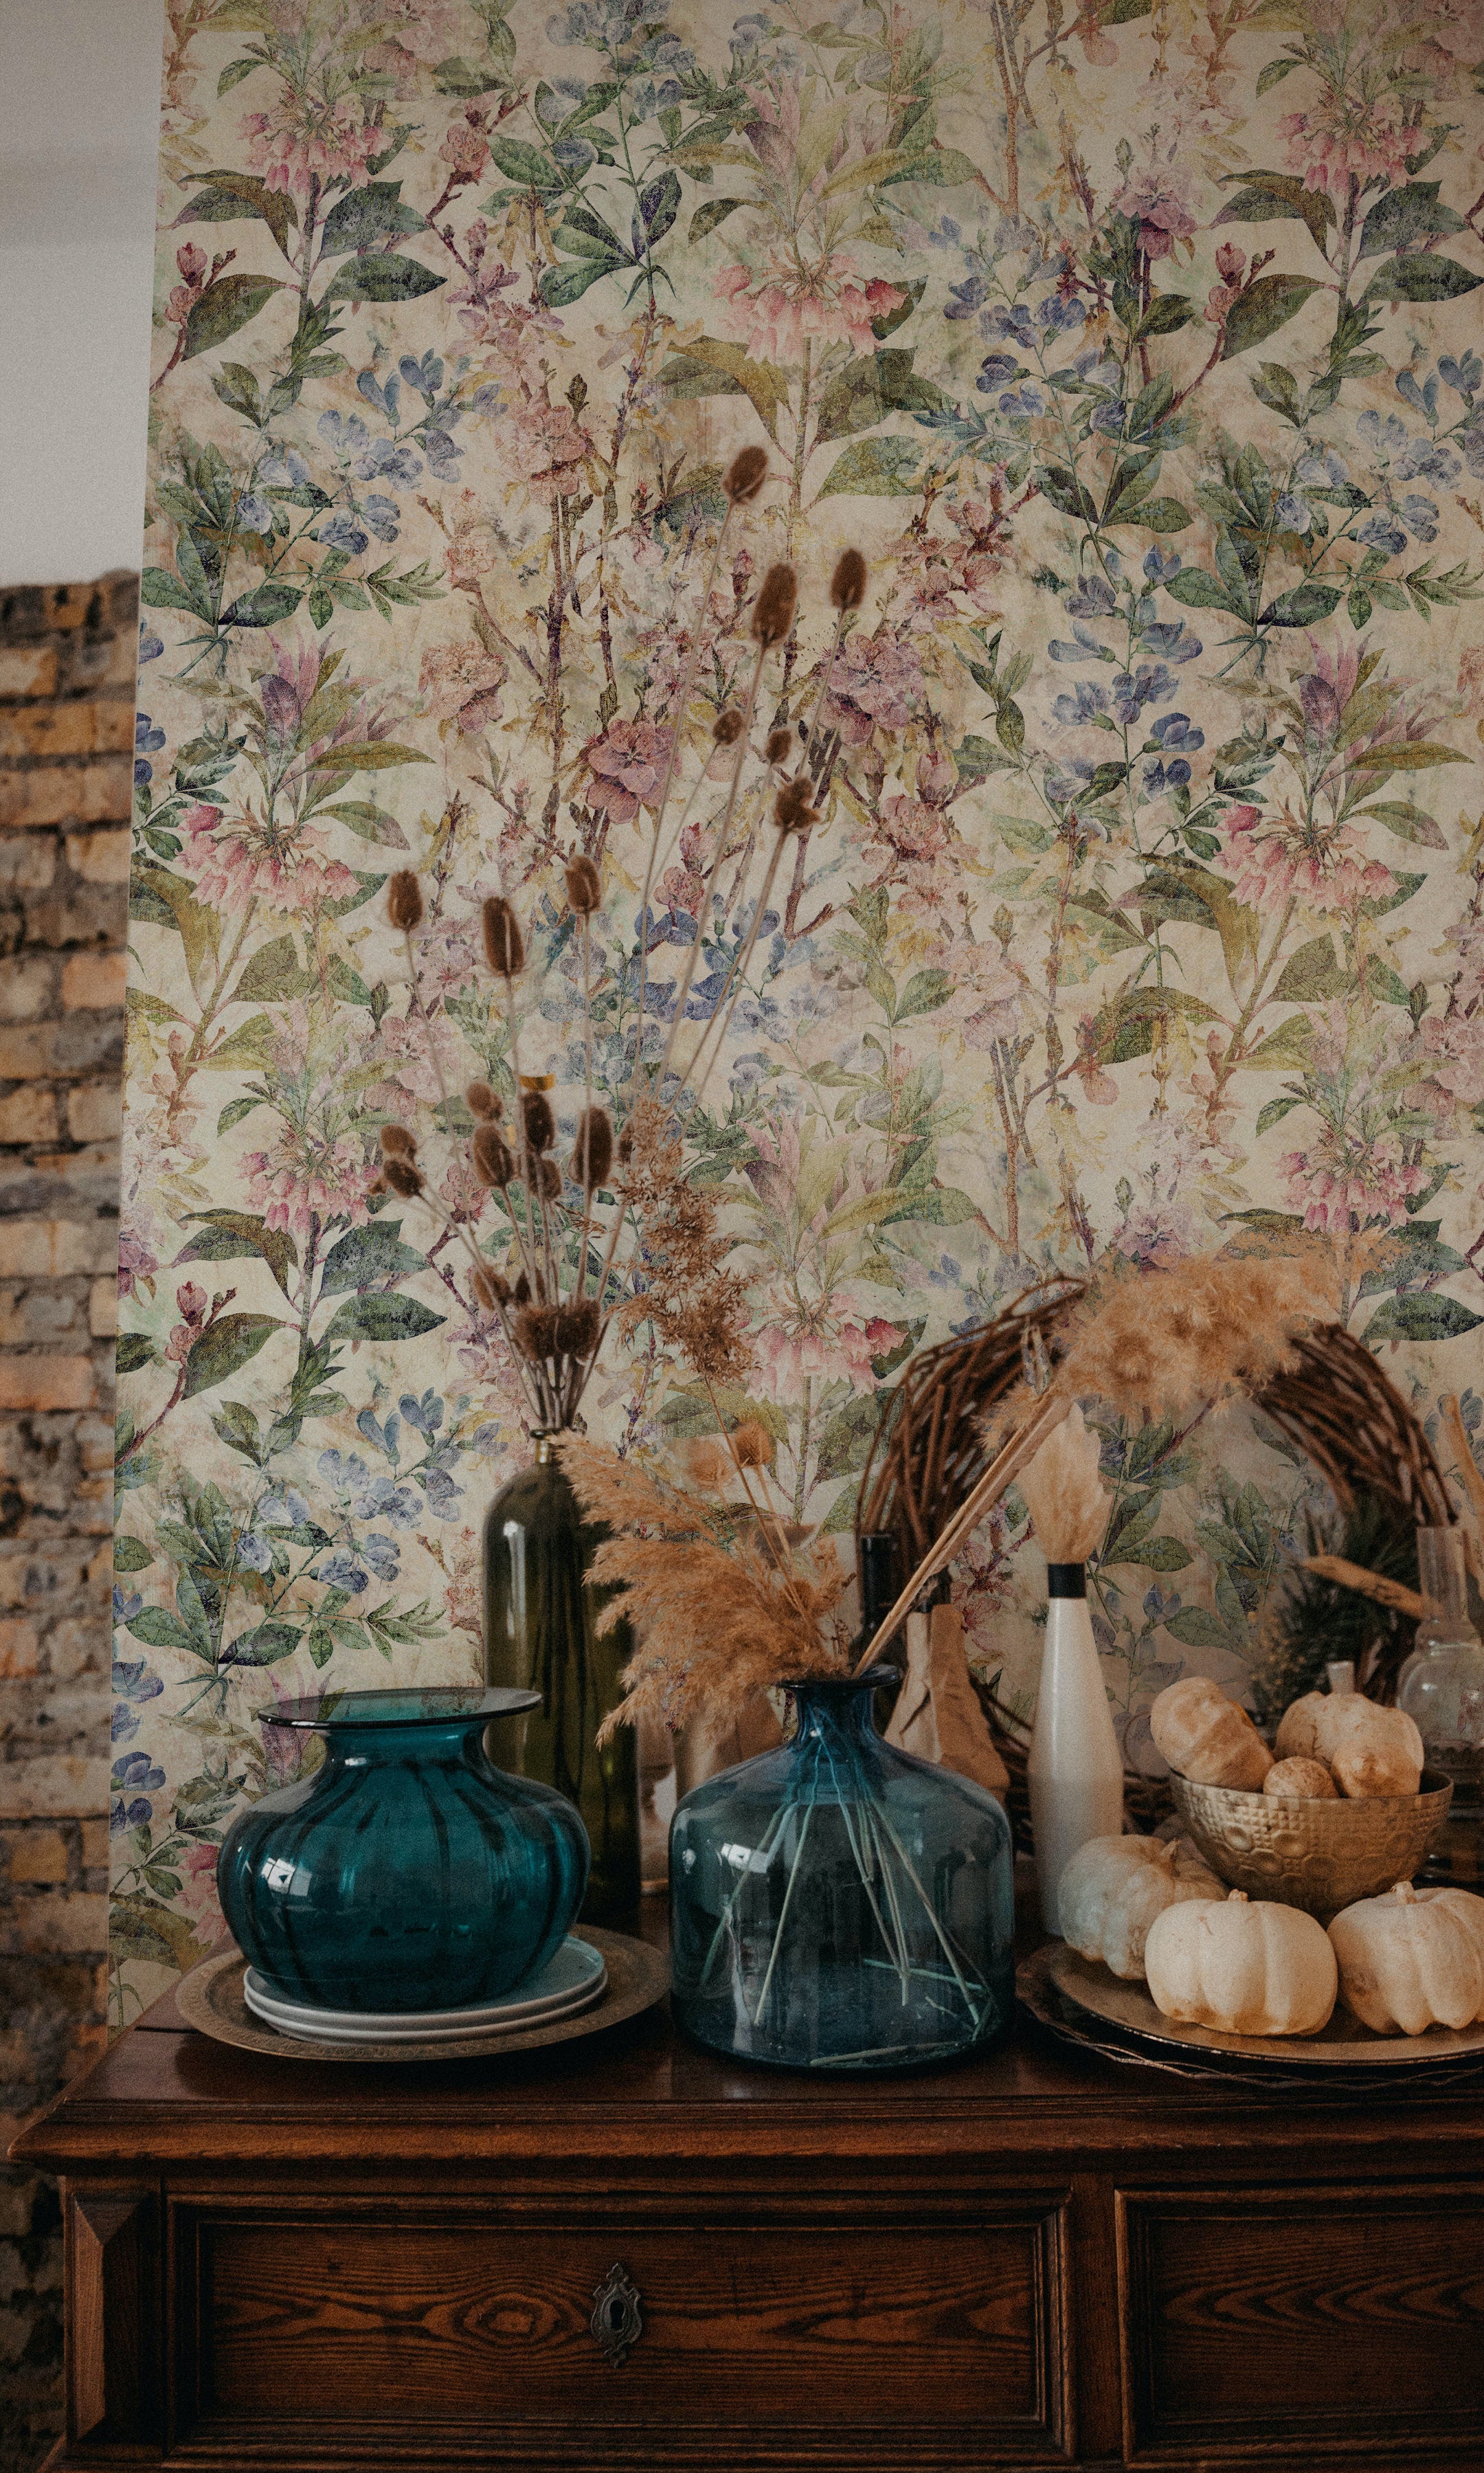 A close-up view of the "Ancient Florals Wallpaper" showcasing its intricate botanical print. The wallpaper decorates a room corner styled with dried flowers in vases and seasonal pumpkins, contributing to a rustic and quaint interior design.